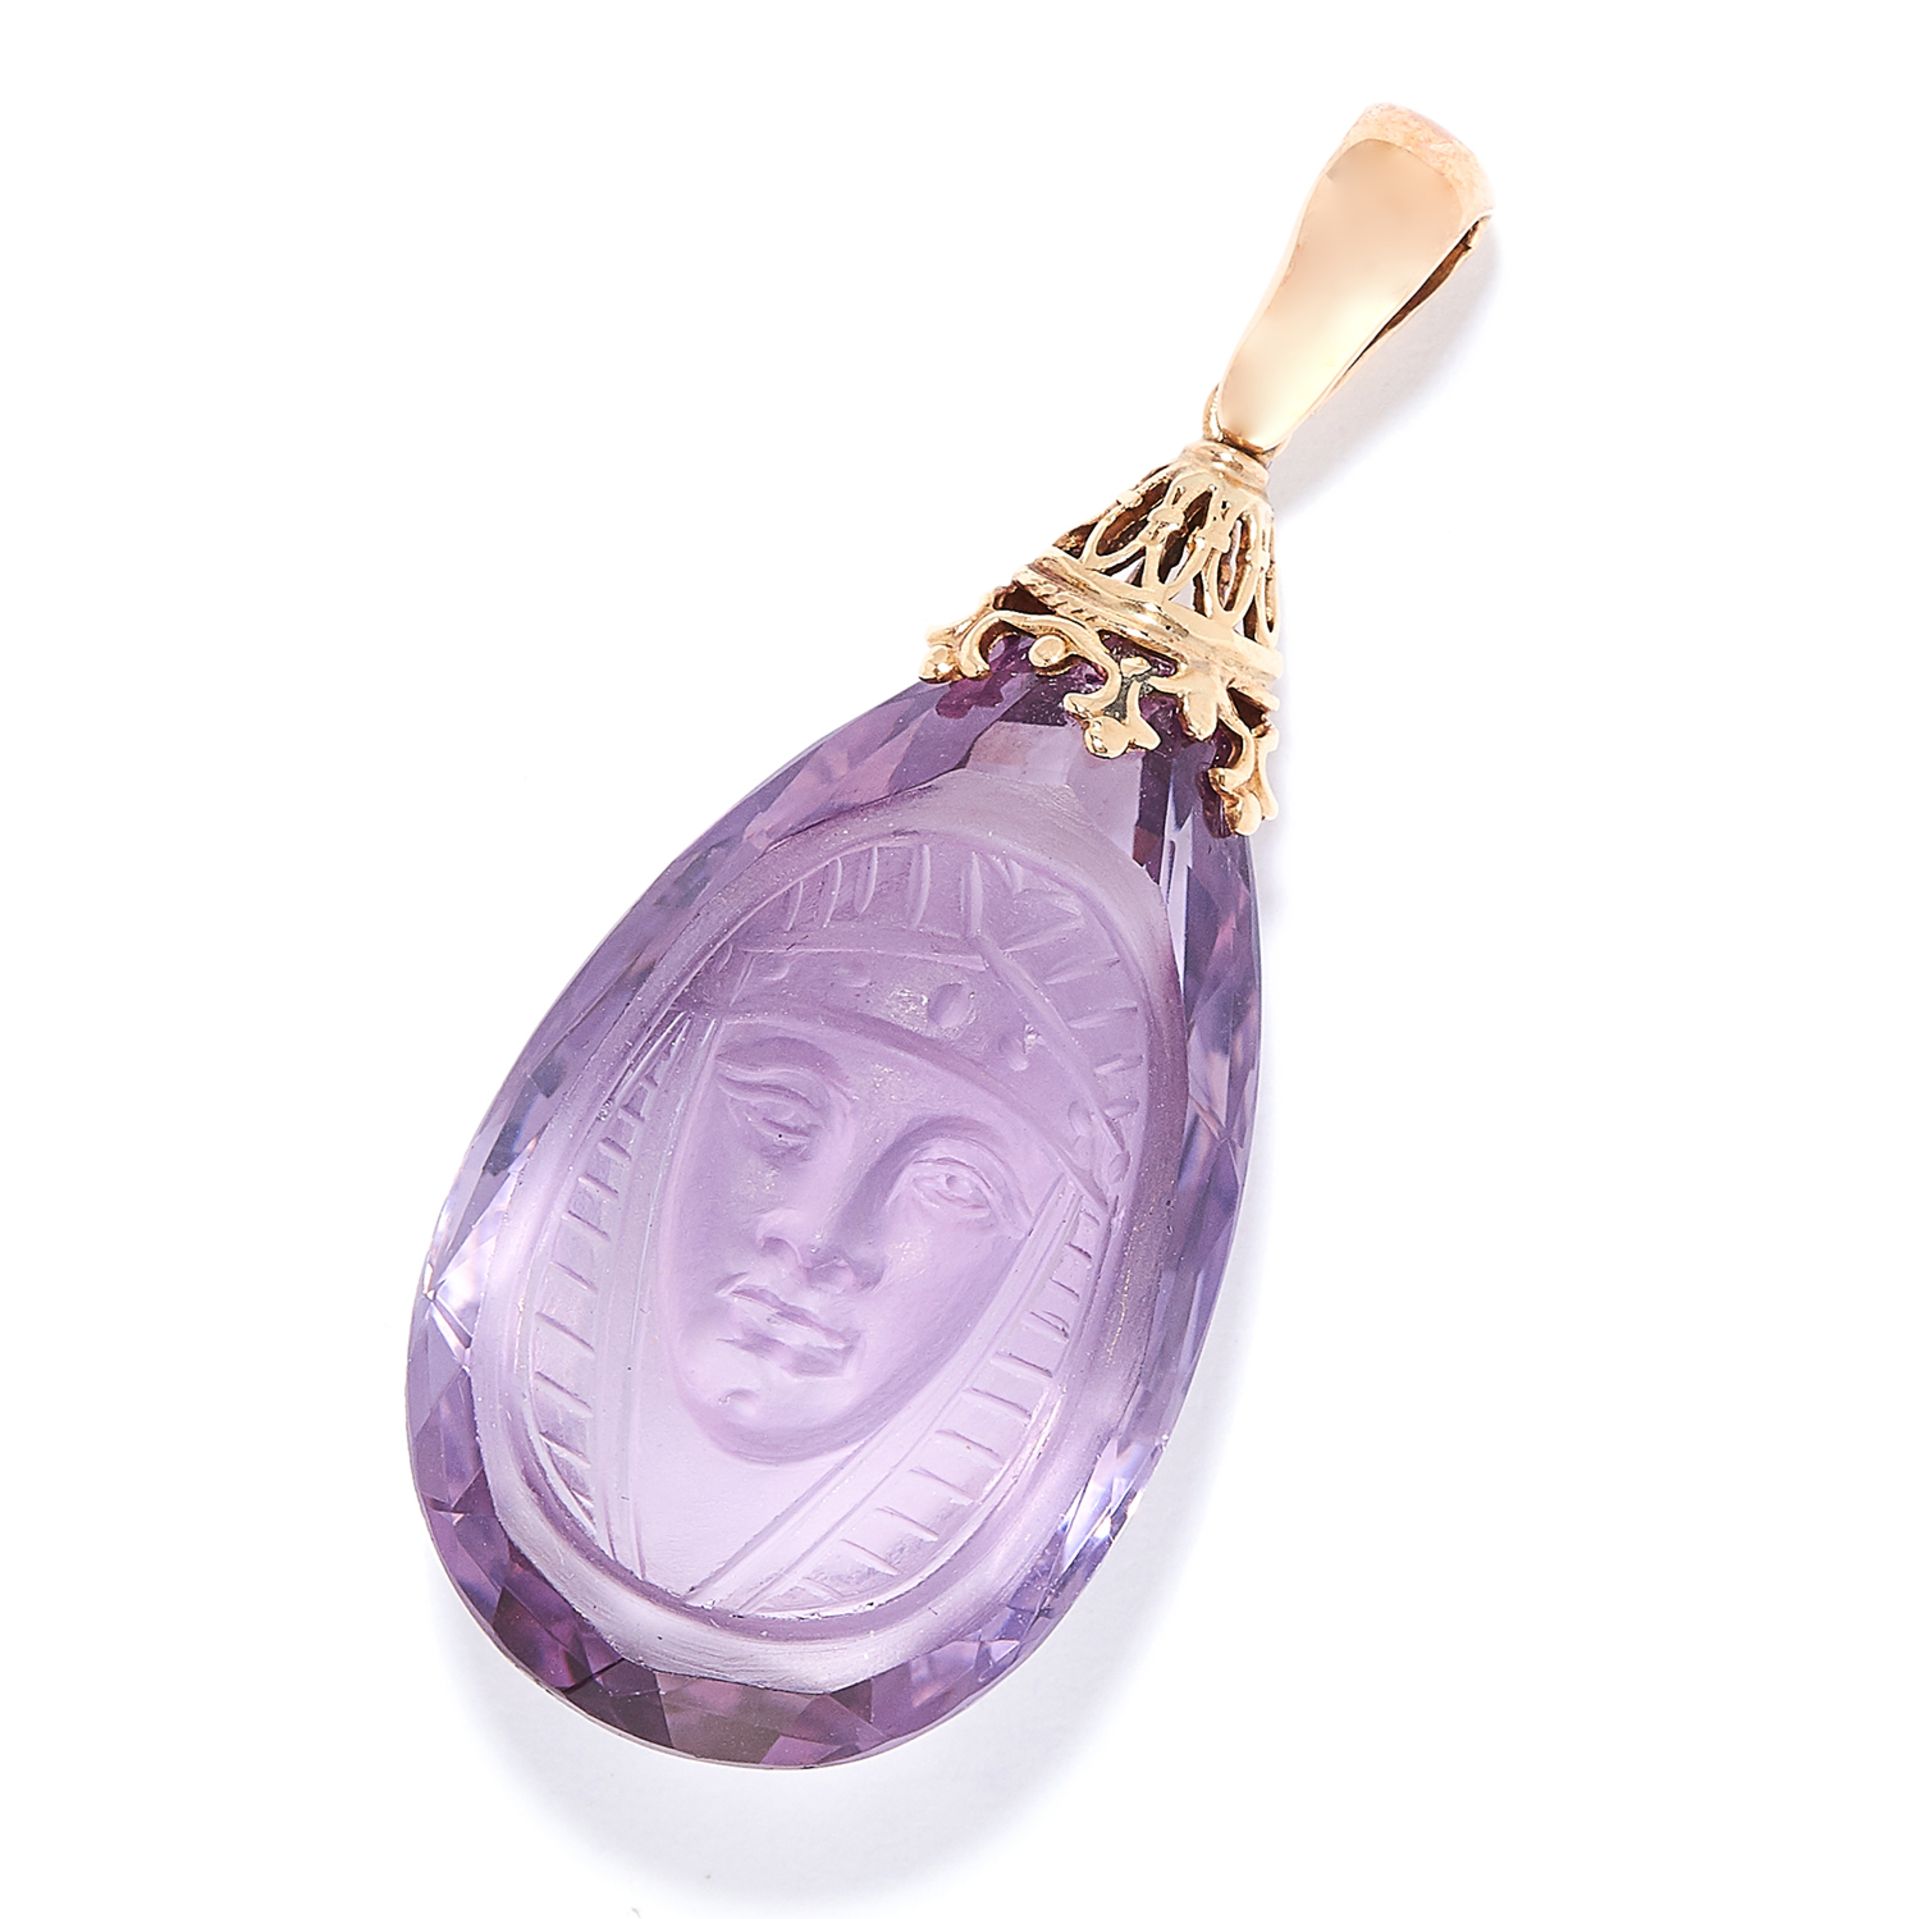 CARVED AMETHYST PENDANT comprising of a carved amethyst drop depicting an Egyptian figure, 3.9cm,